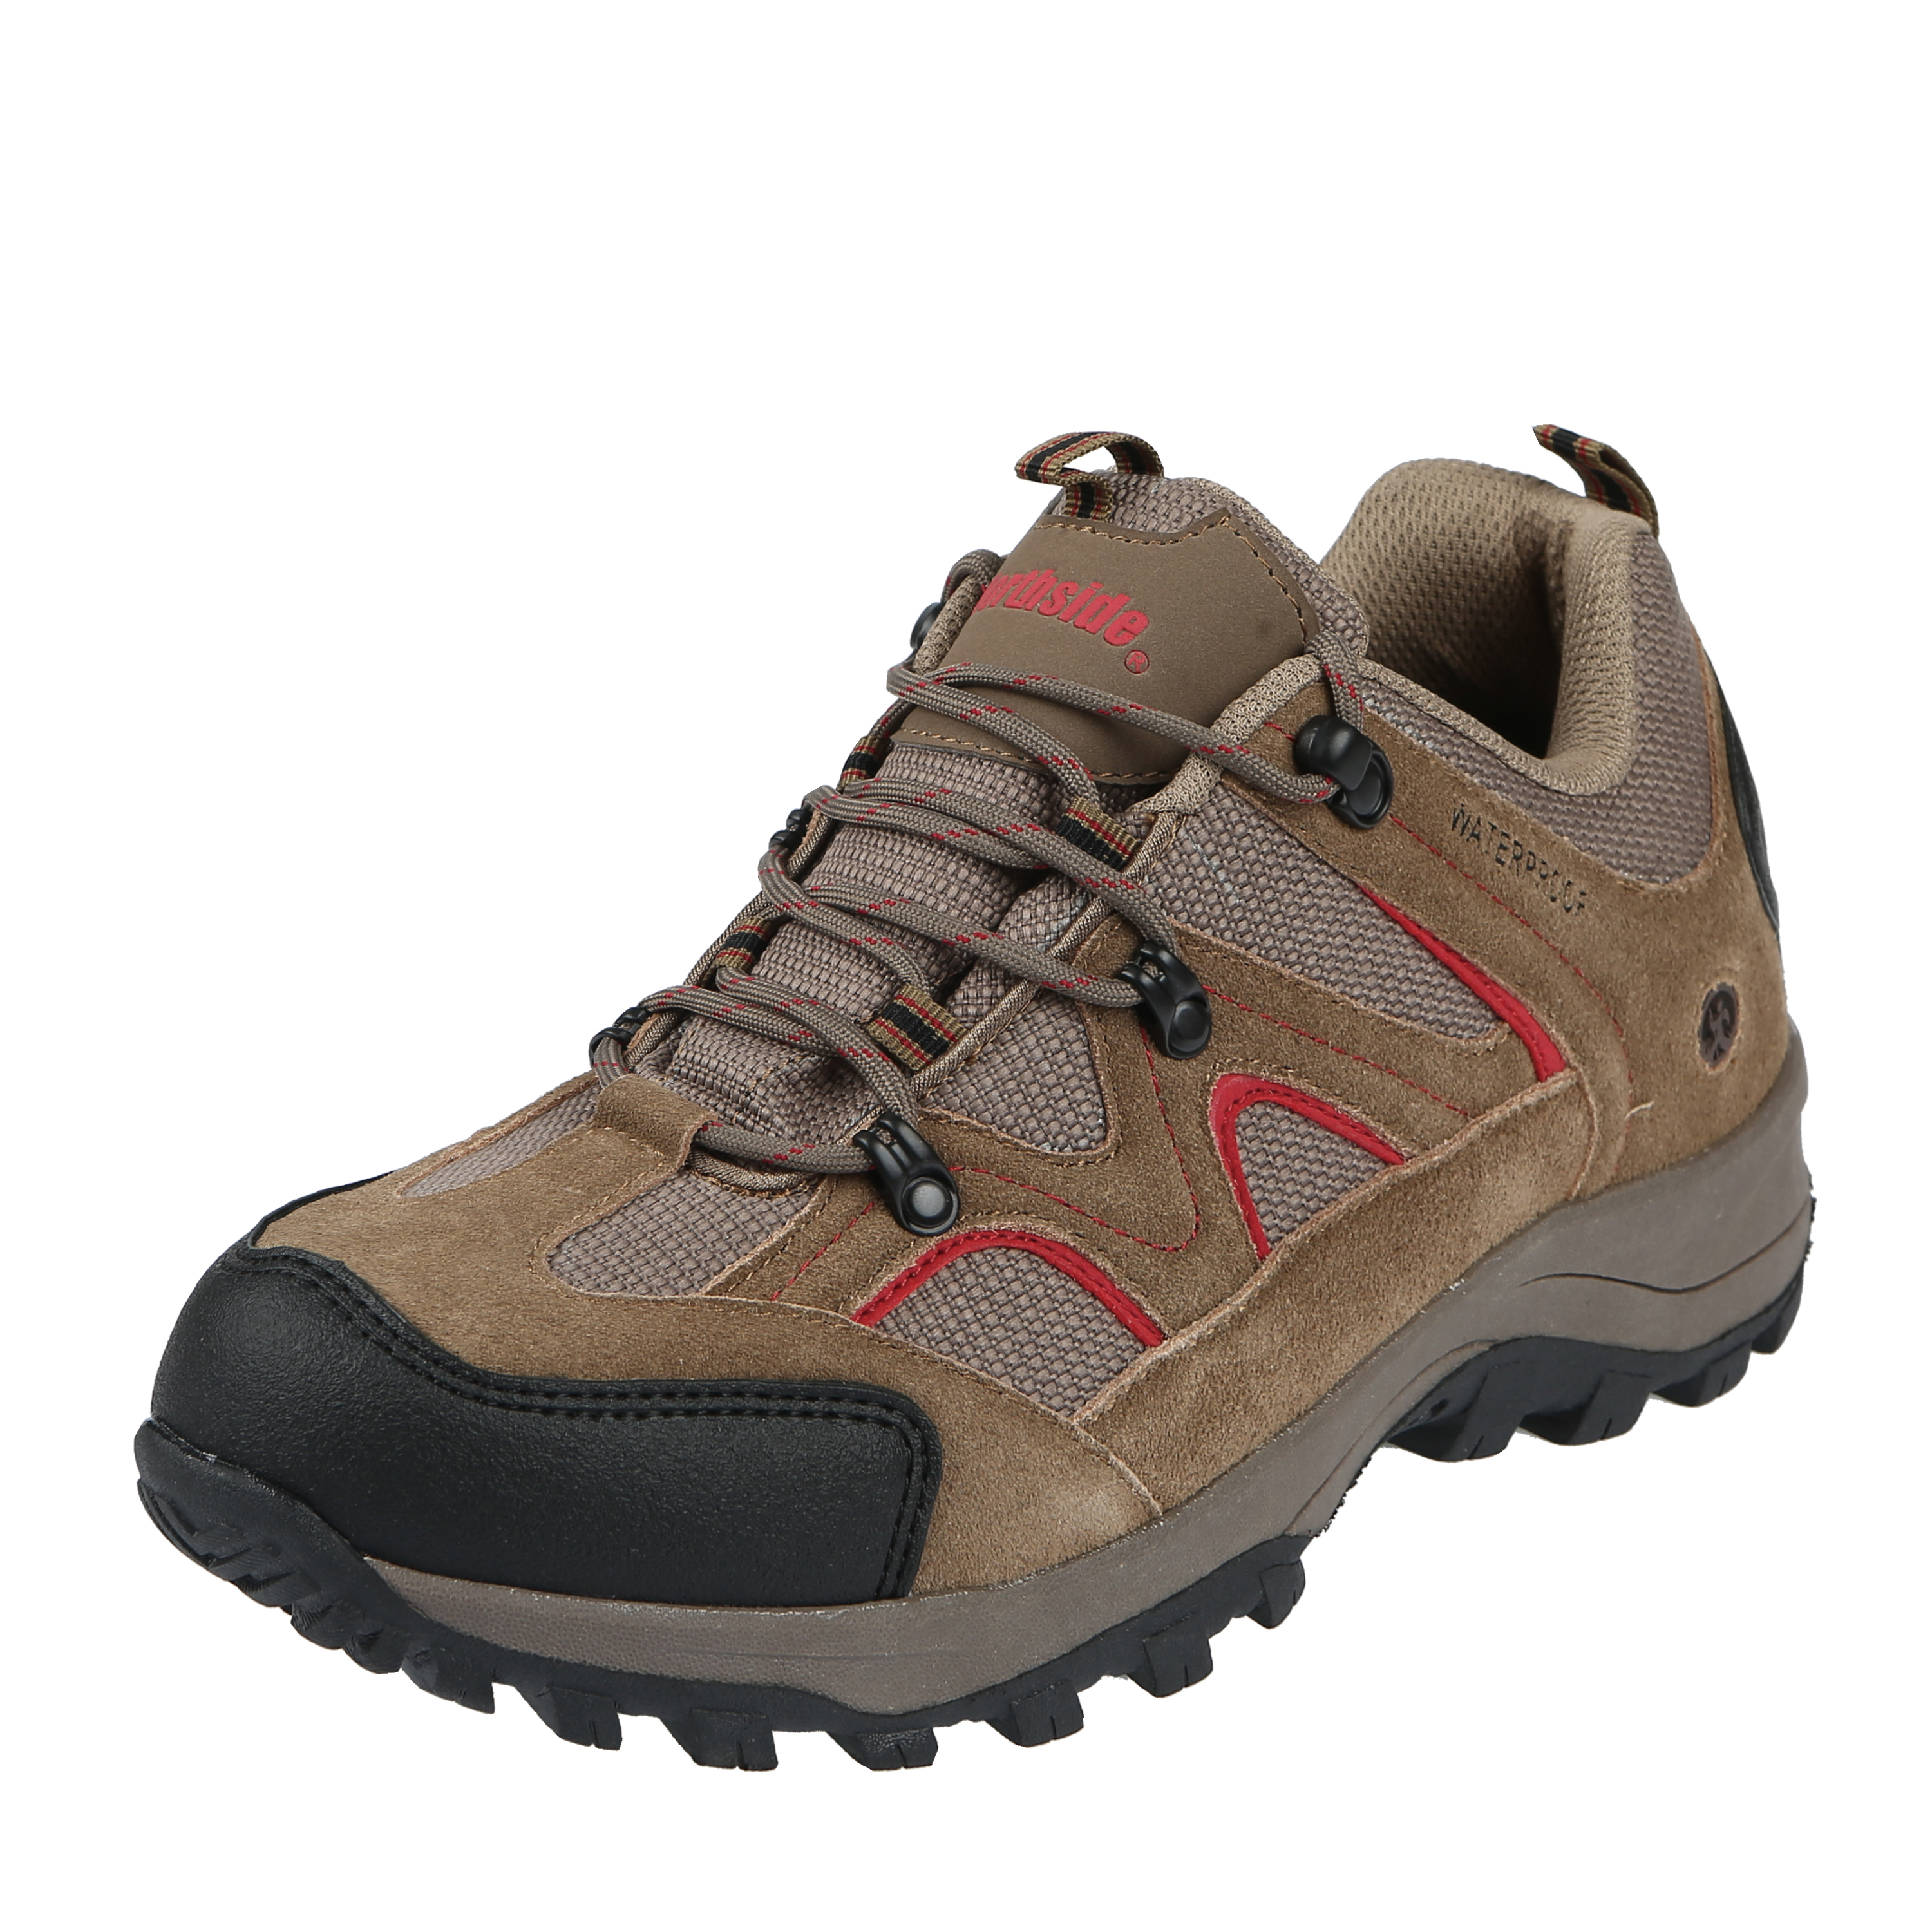 Northside Men's Snohomish Leather Water Resistant Hiking Shoe (Wide Available) - image 1 of 5